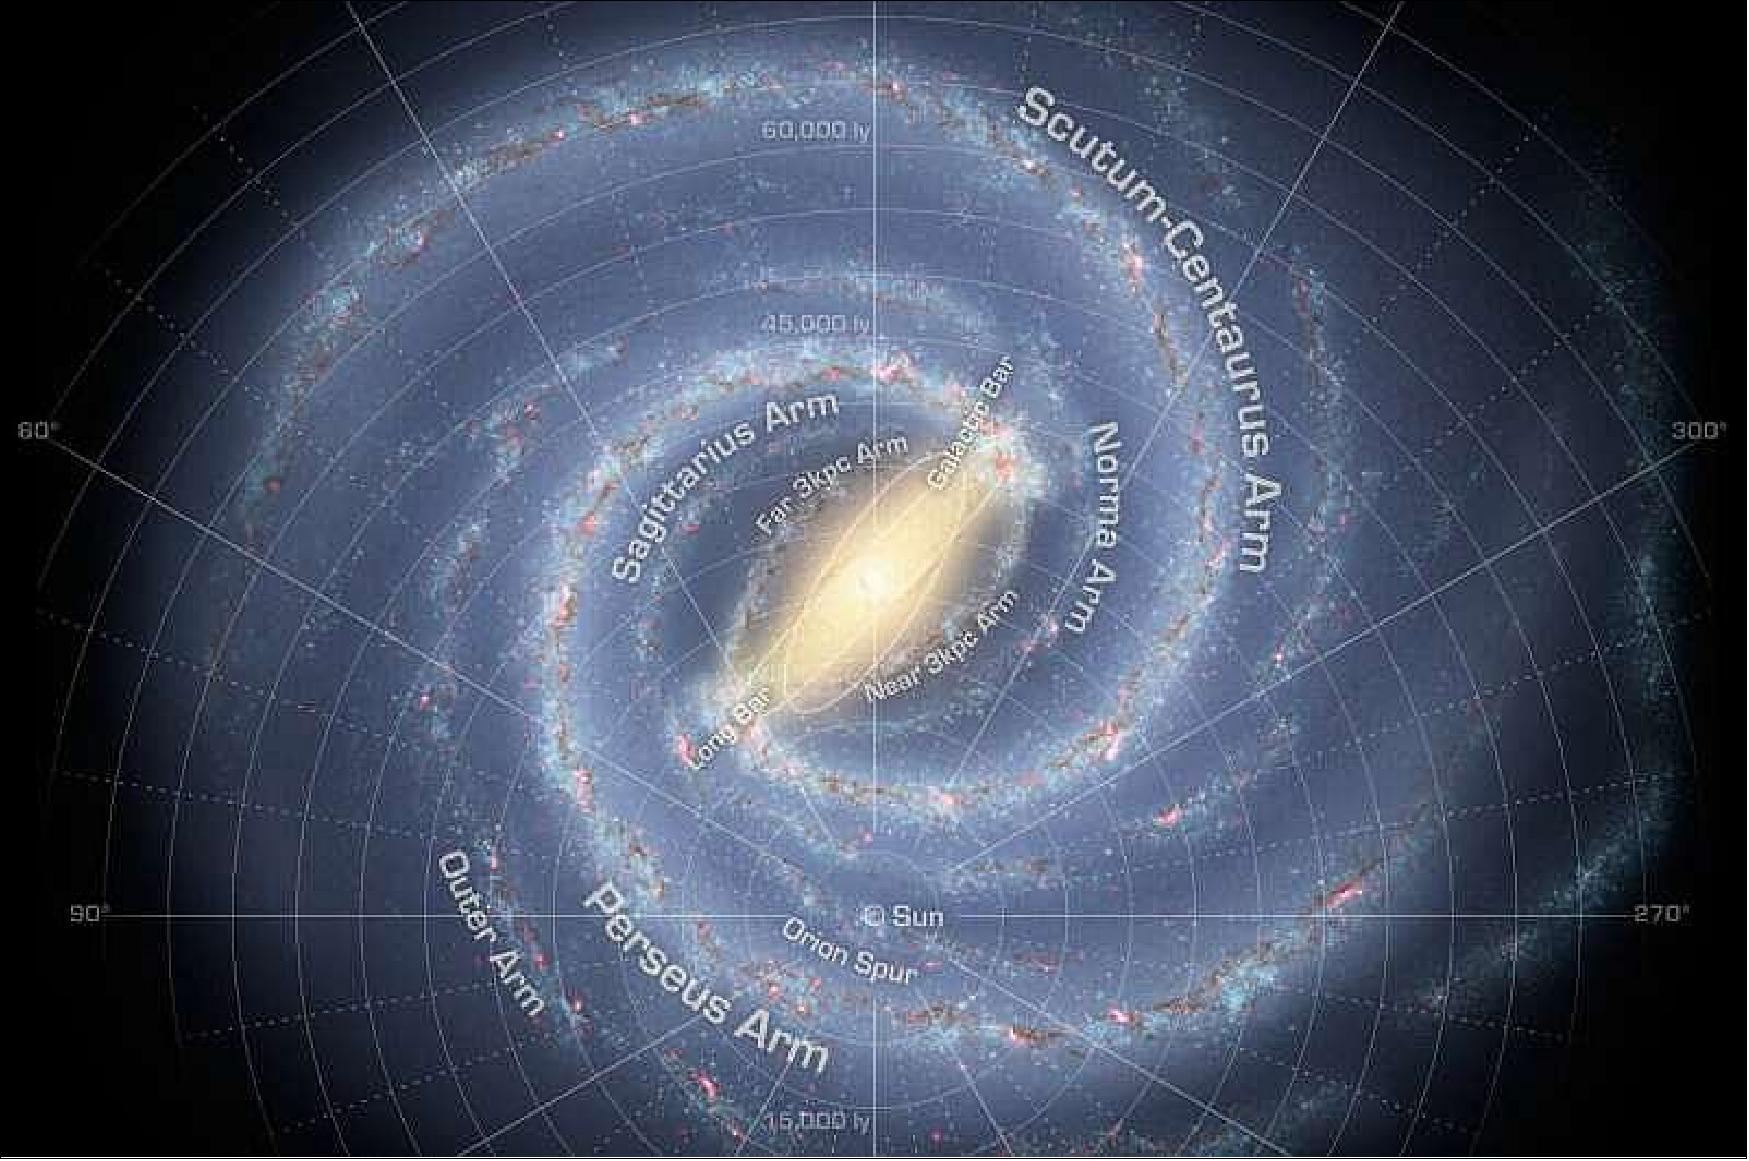 Figure 8: Our home in all its galactic glory (image credit: CC0 Public Domain)